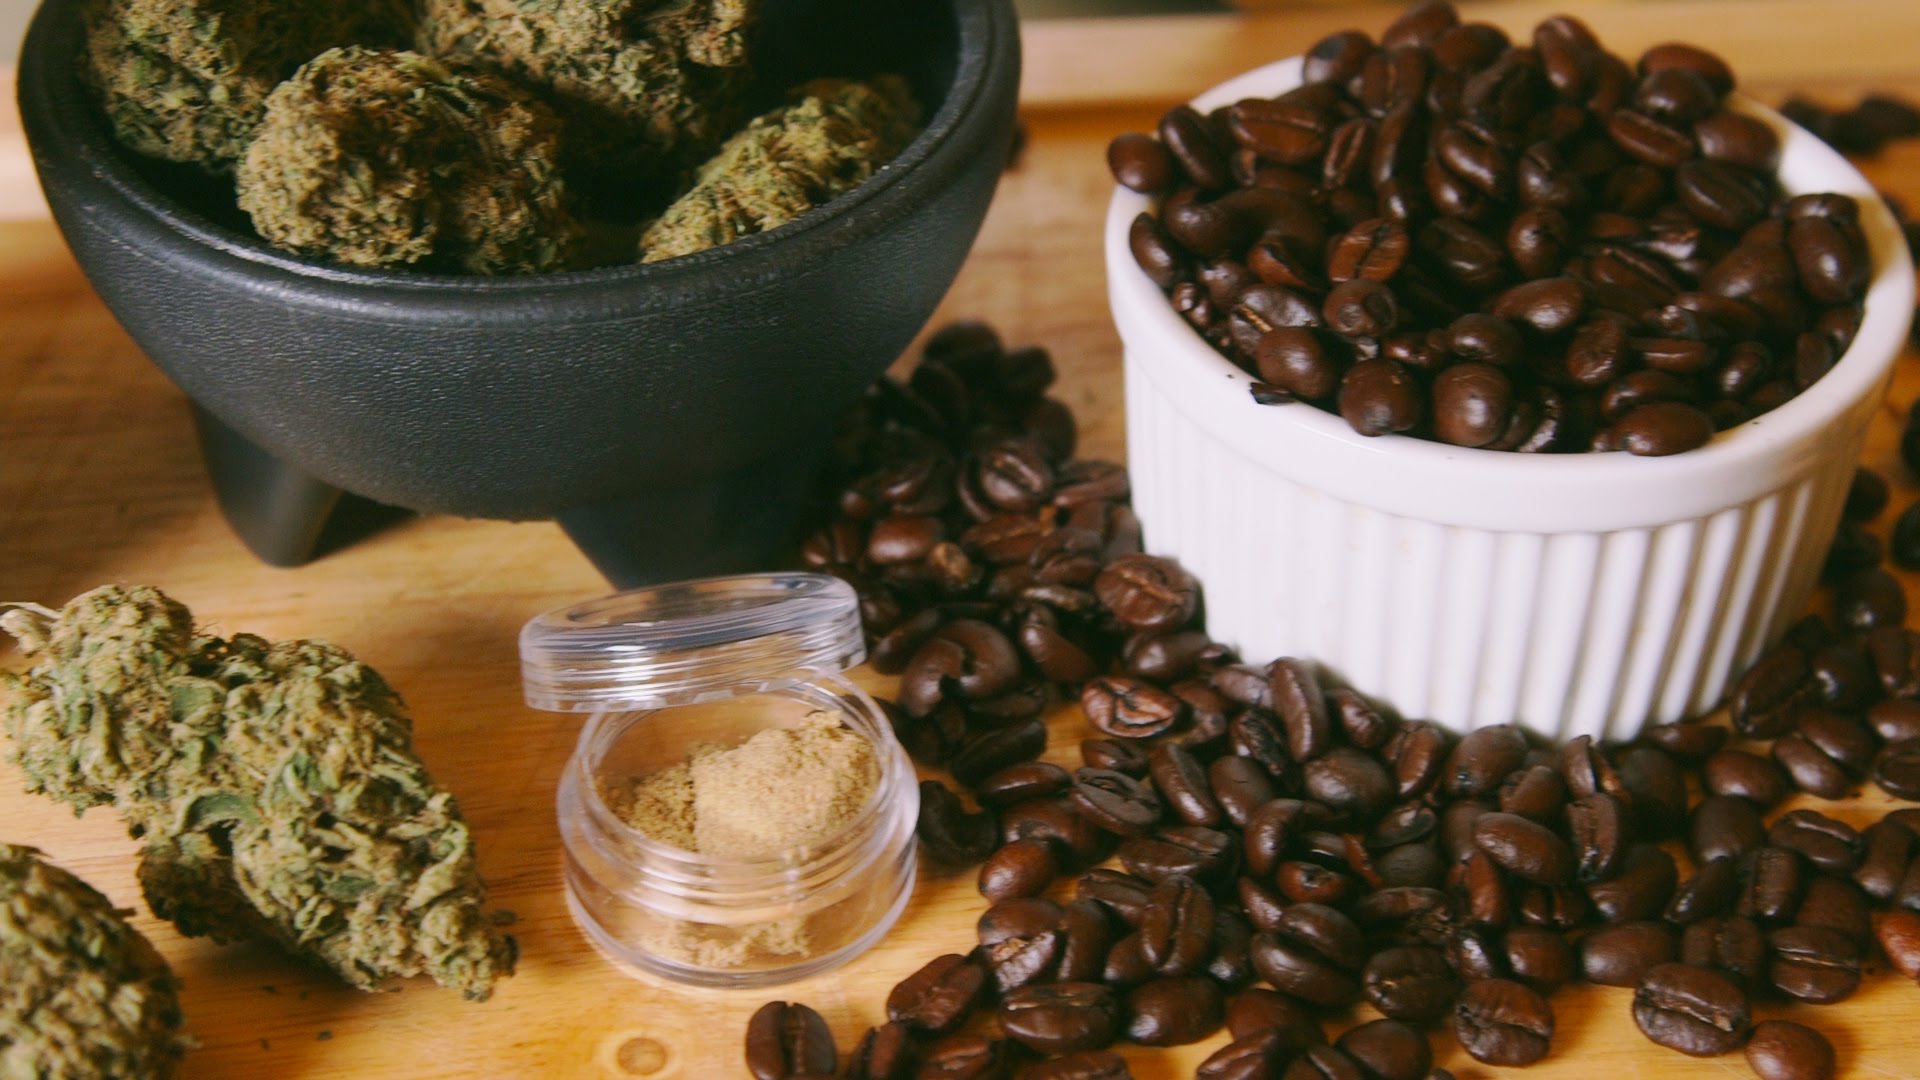 Your Own Canna Cafe: 2 Ways to Make Cannabis Infused Coffee